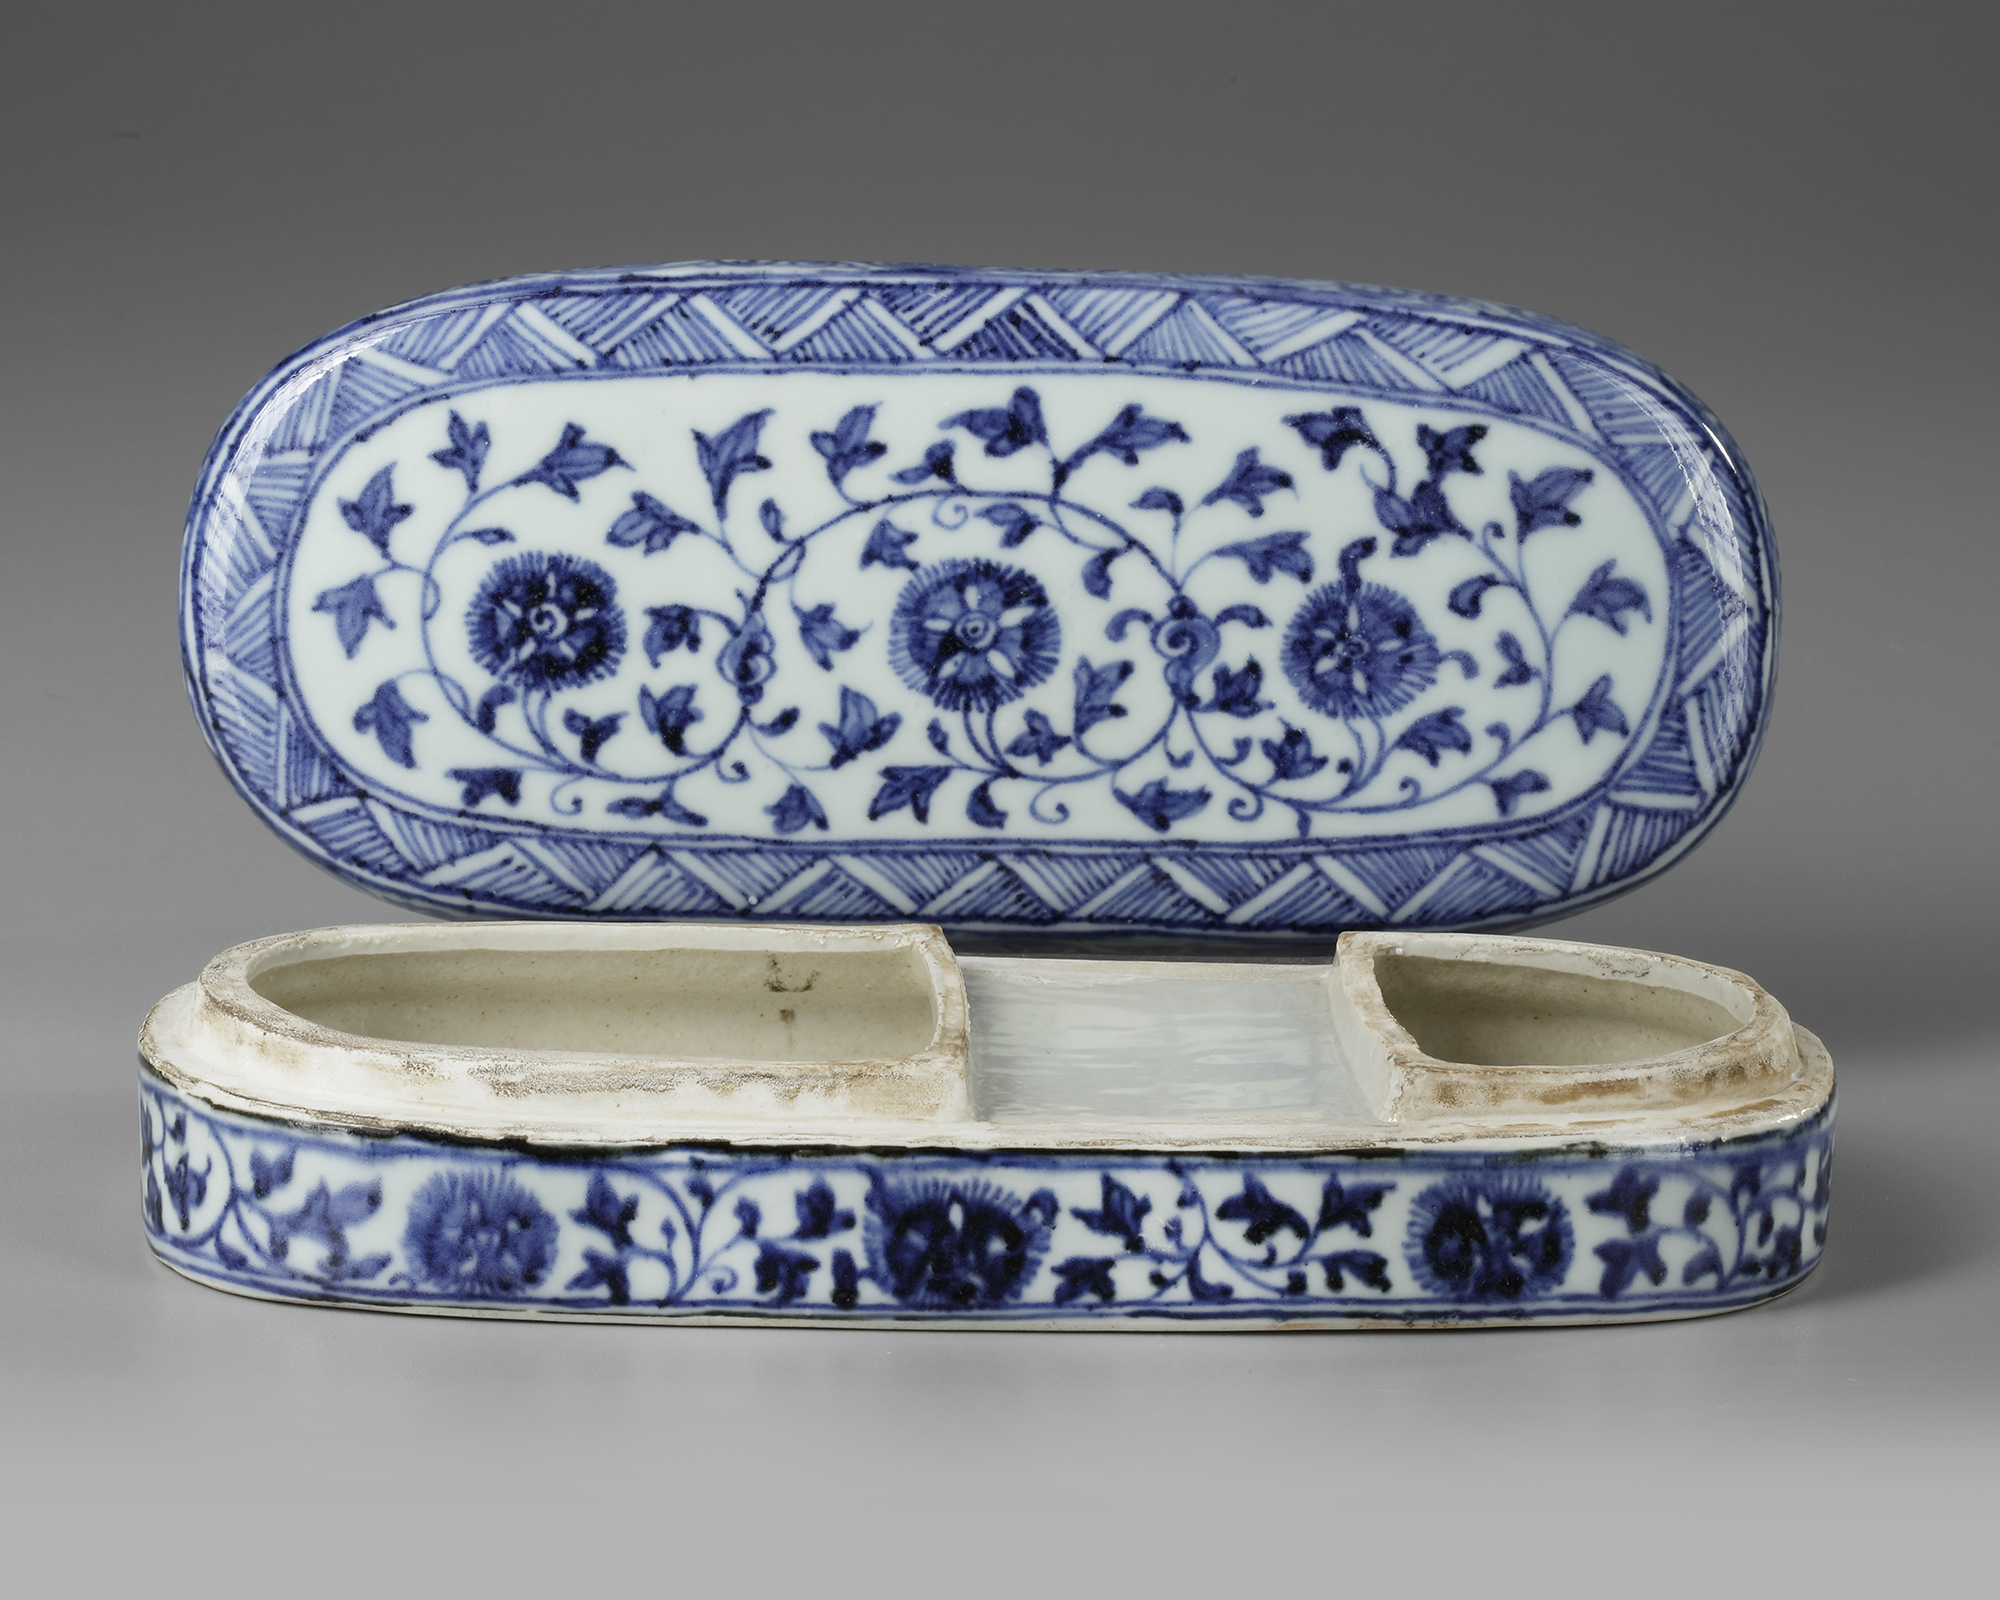 A CHINESE BLUE AND WHITE PEN BOX FOR THE ISLAMIC MARKET, QING DYNASTY (1644-1911) - Image 3 of 5